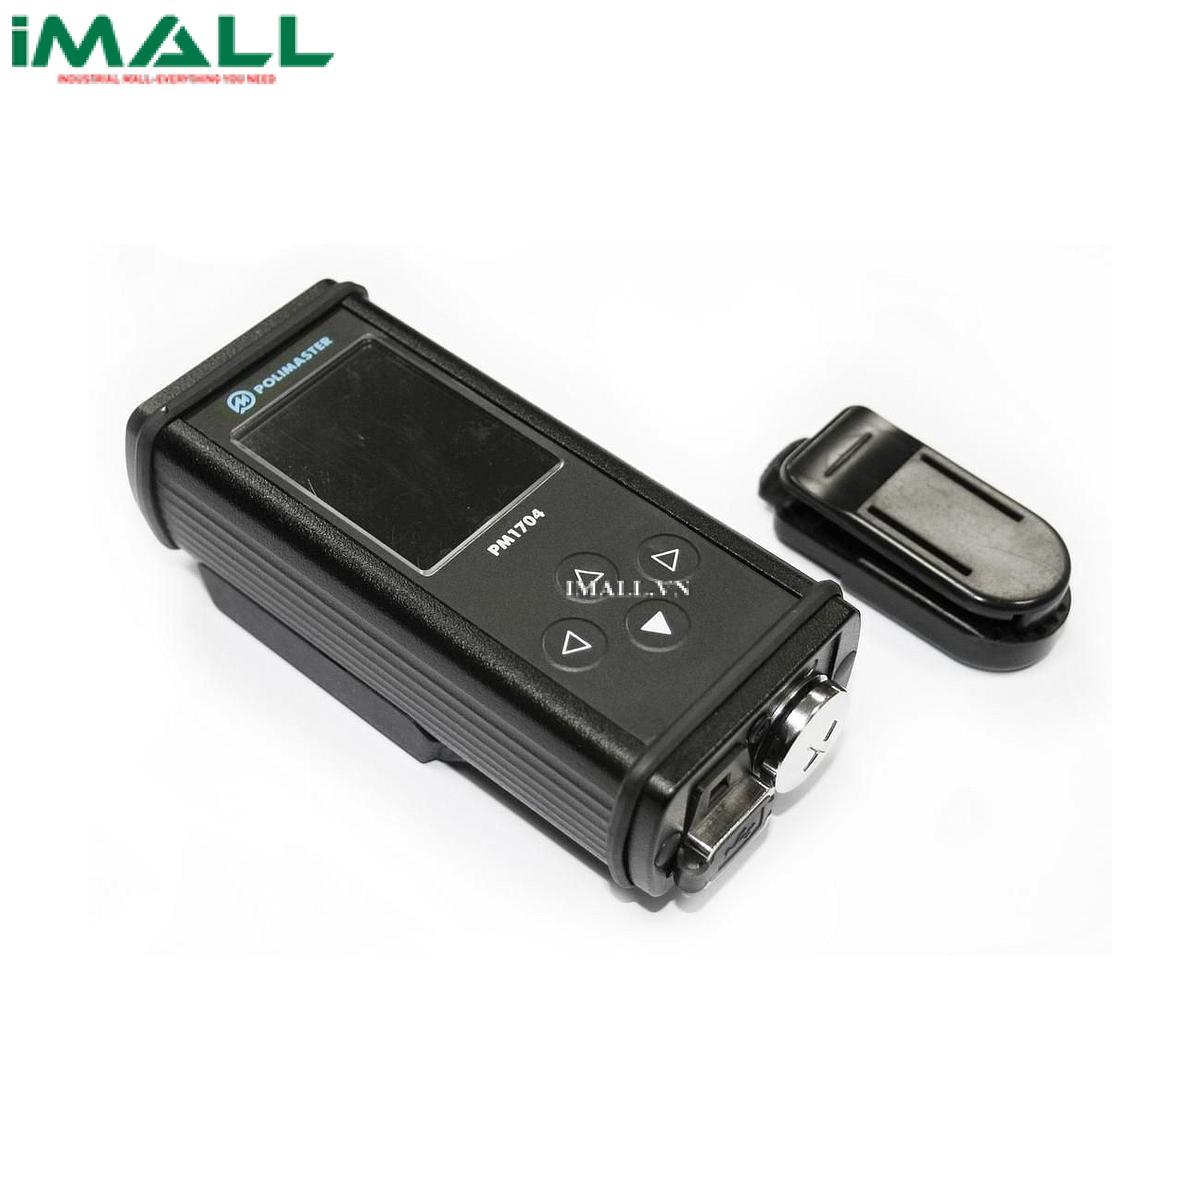 Spectroscopic Personal Radiation Detectors Polimaster PM1704M